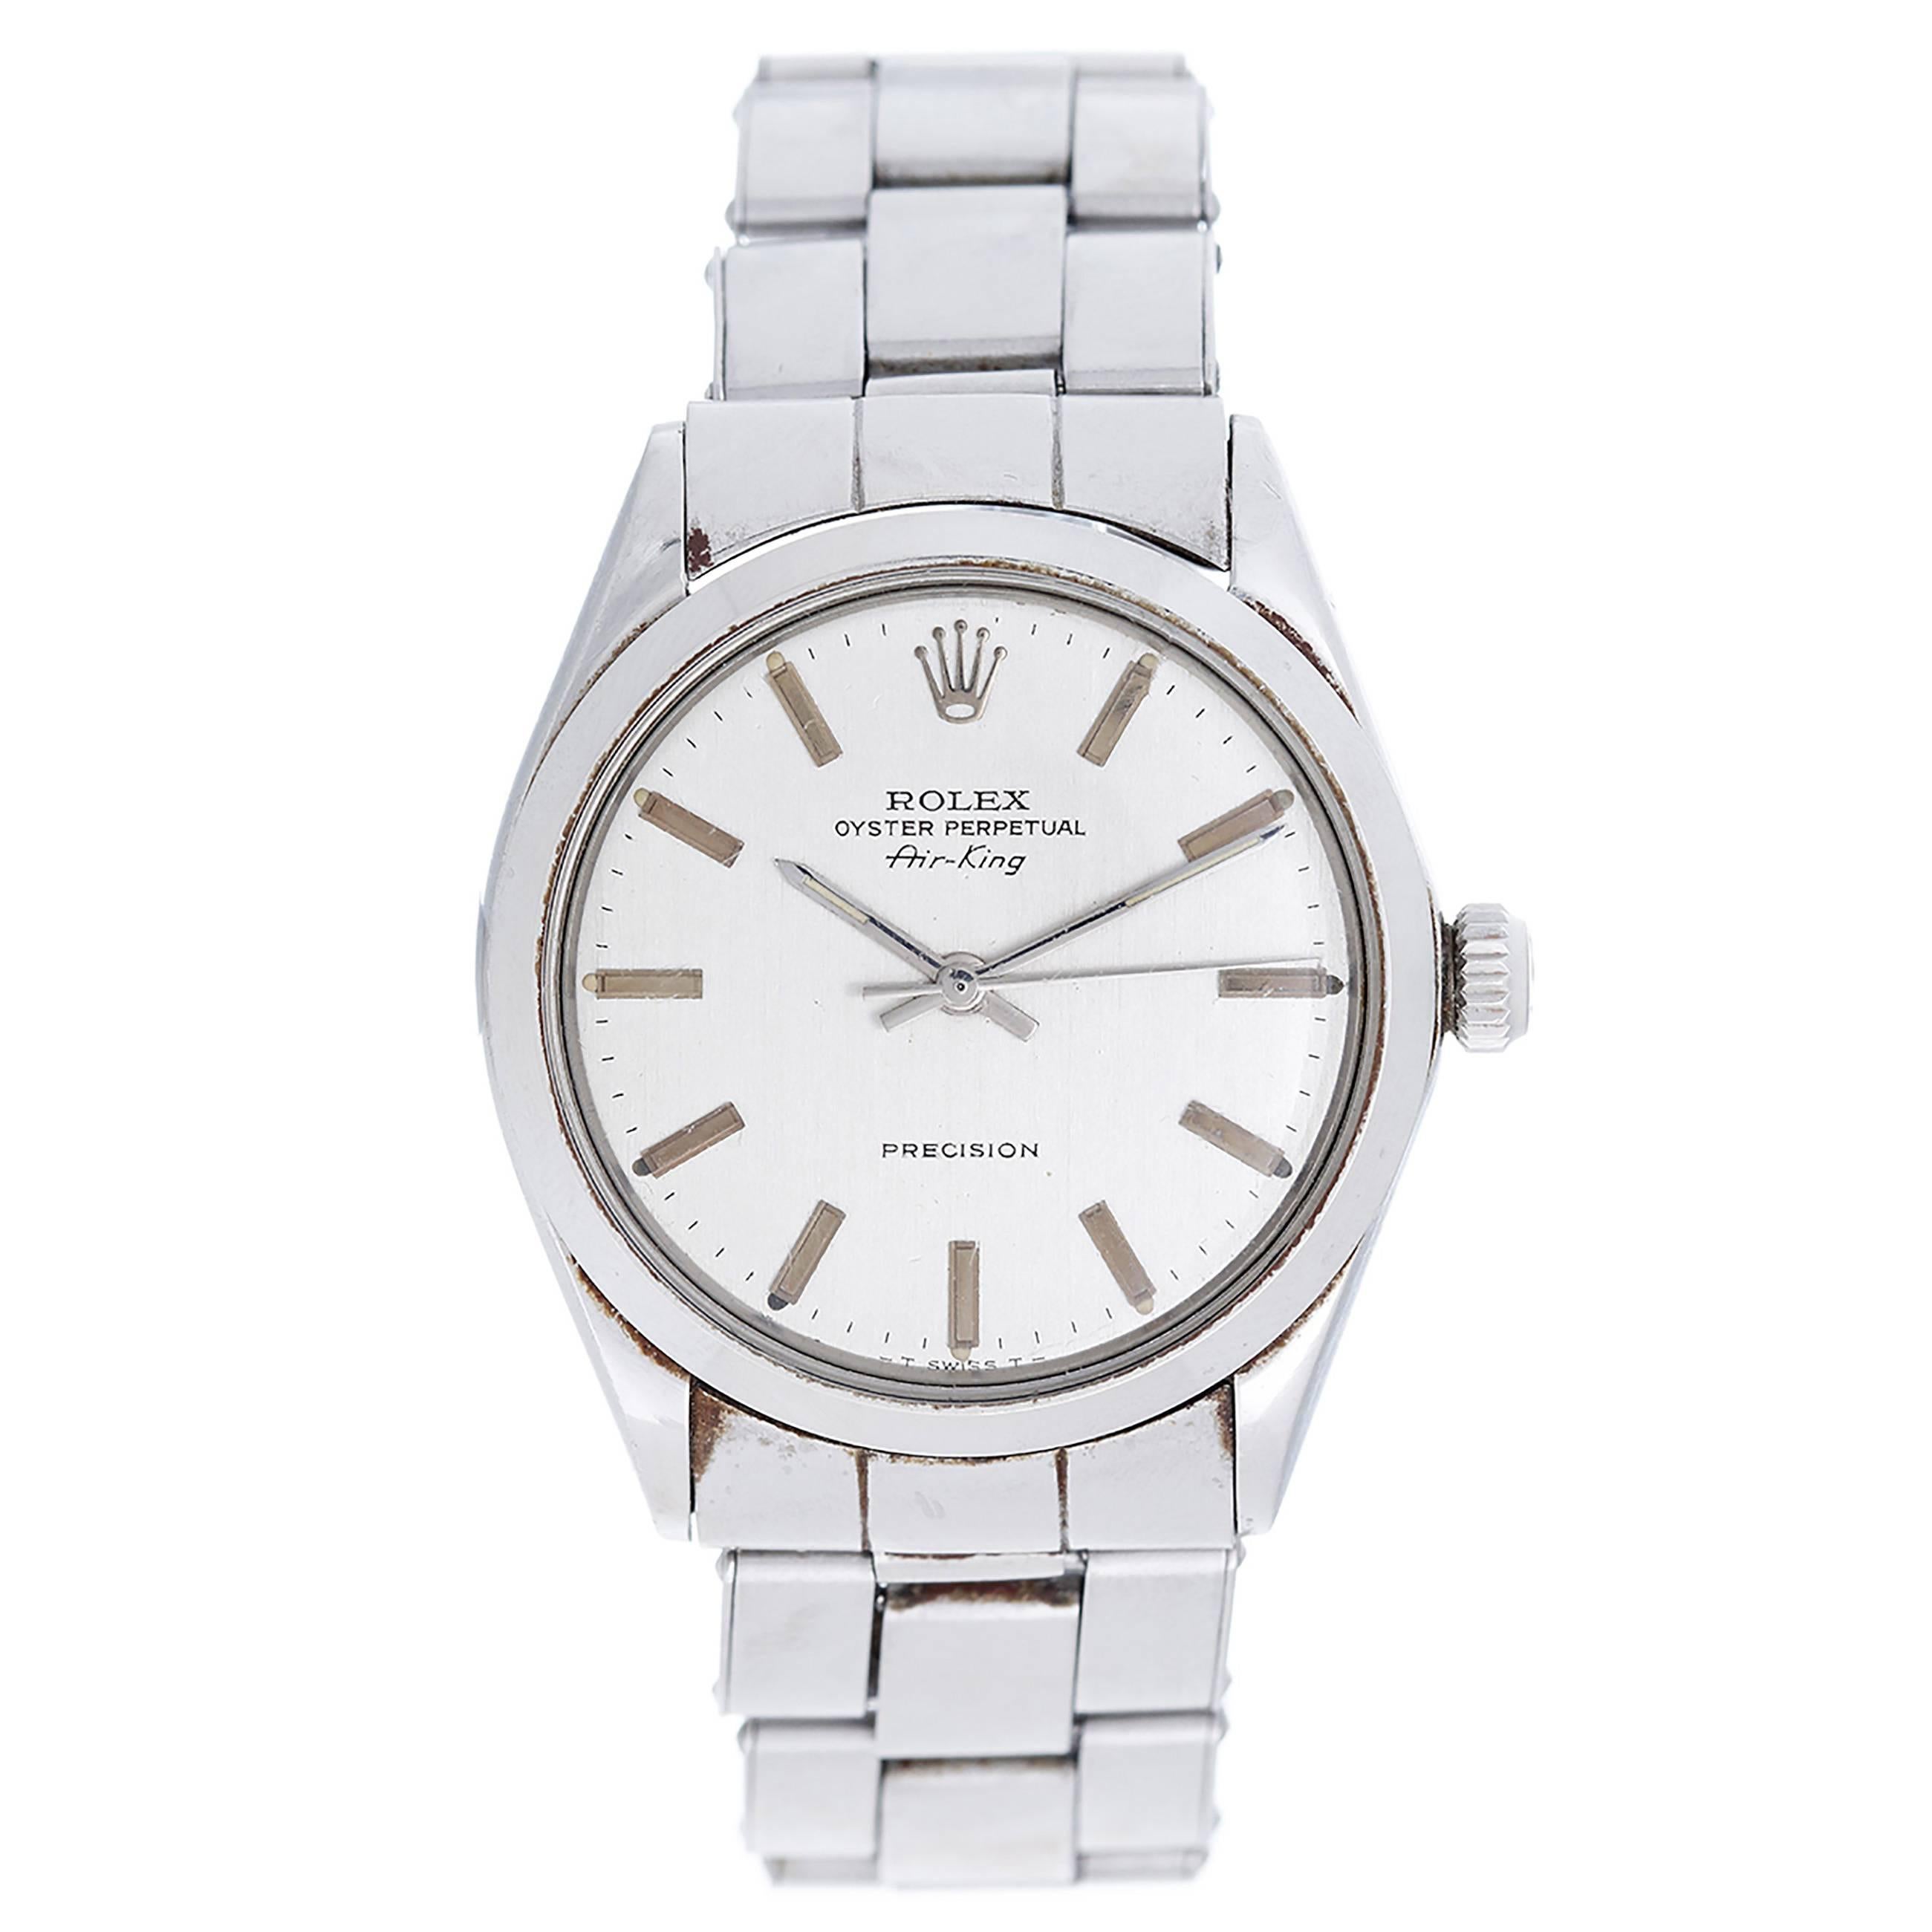 Rolex Stainless Steel Air-King Oyster Perpetual Automatic Wristwatch 5500